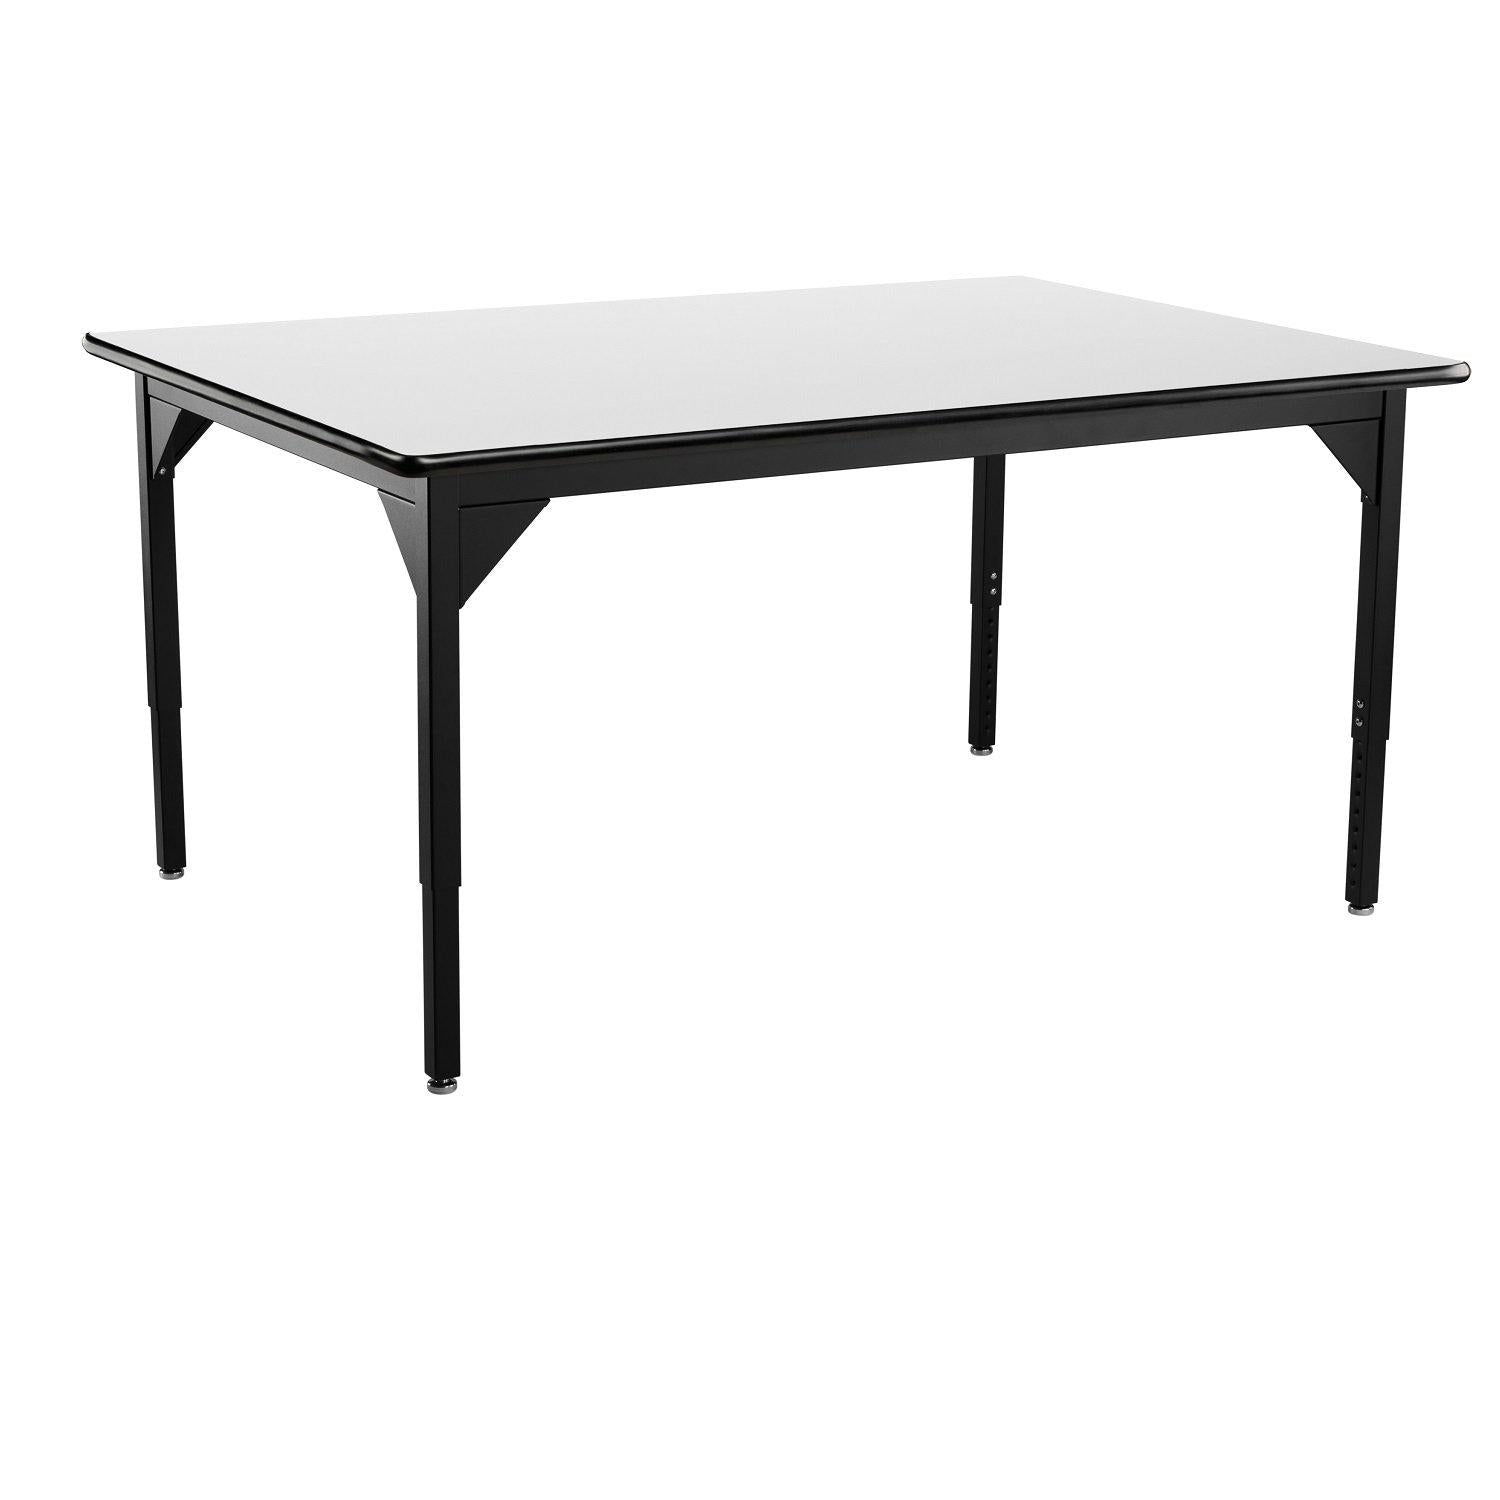 Heavy-Duty Height-Adjustable Utility Table, Black Frame, 42" x 60", Whiteboard High-Pressure Laminate Top